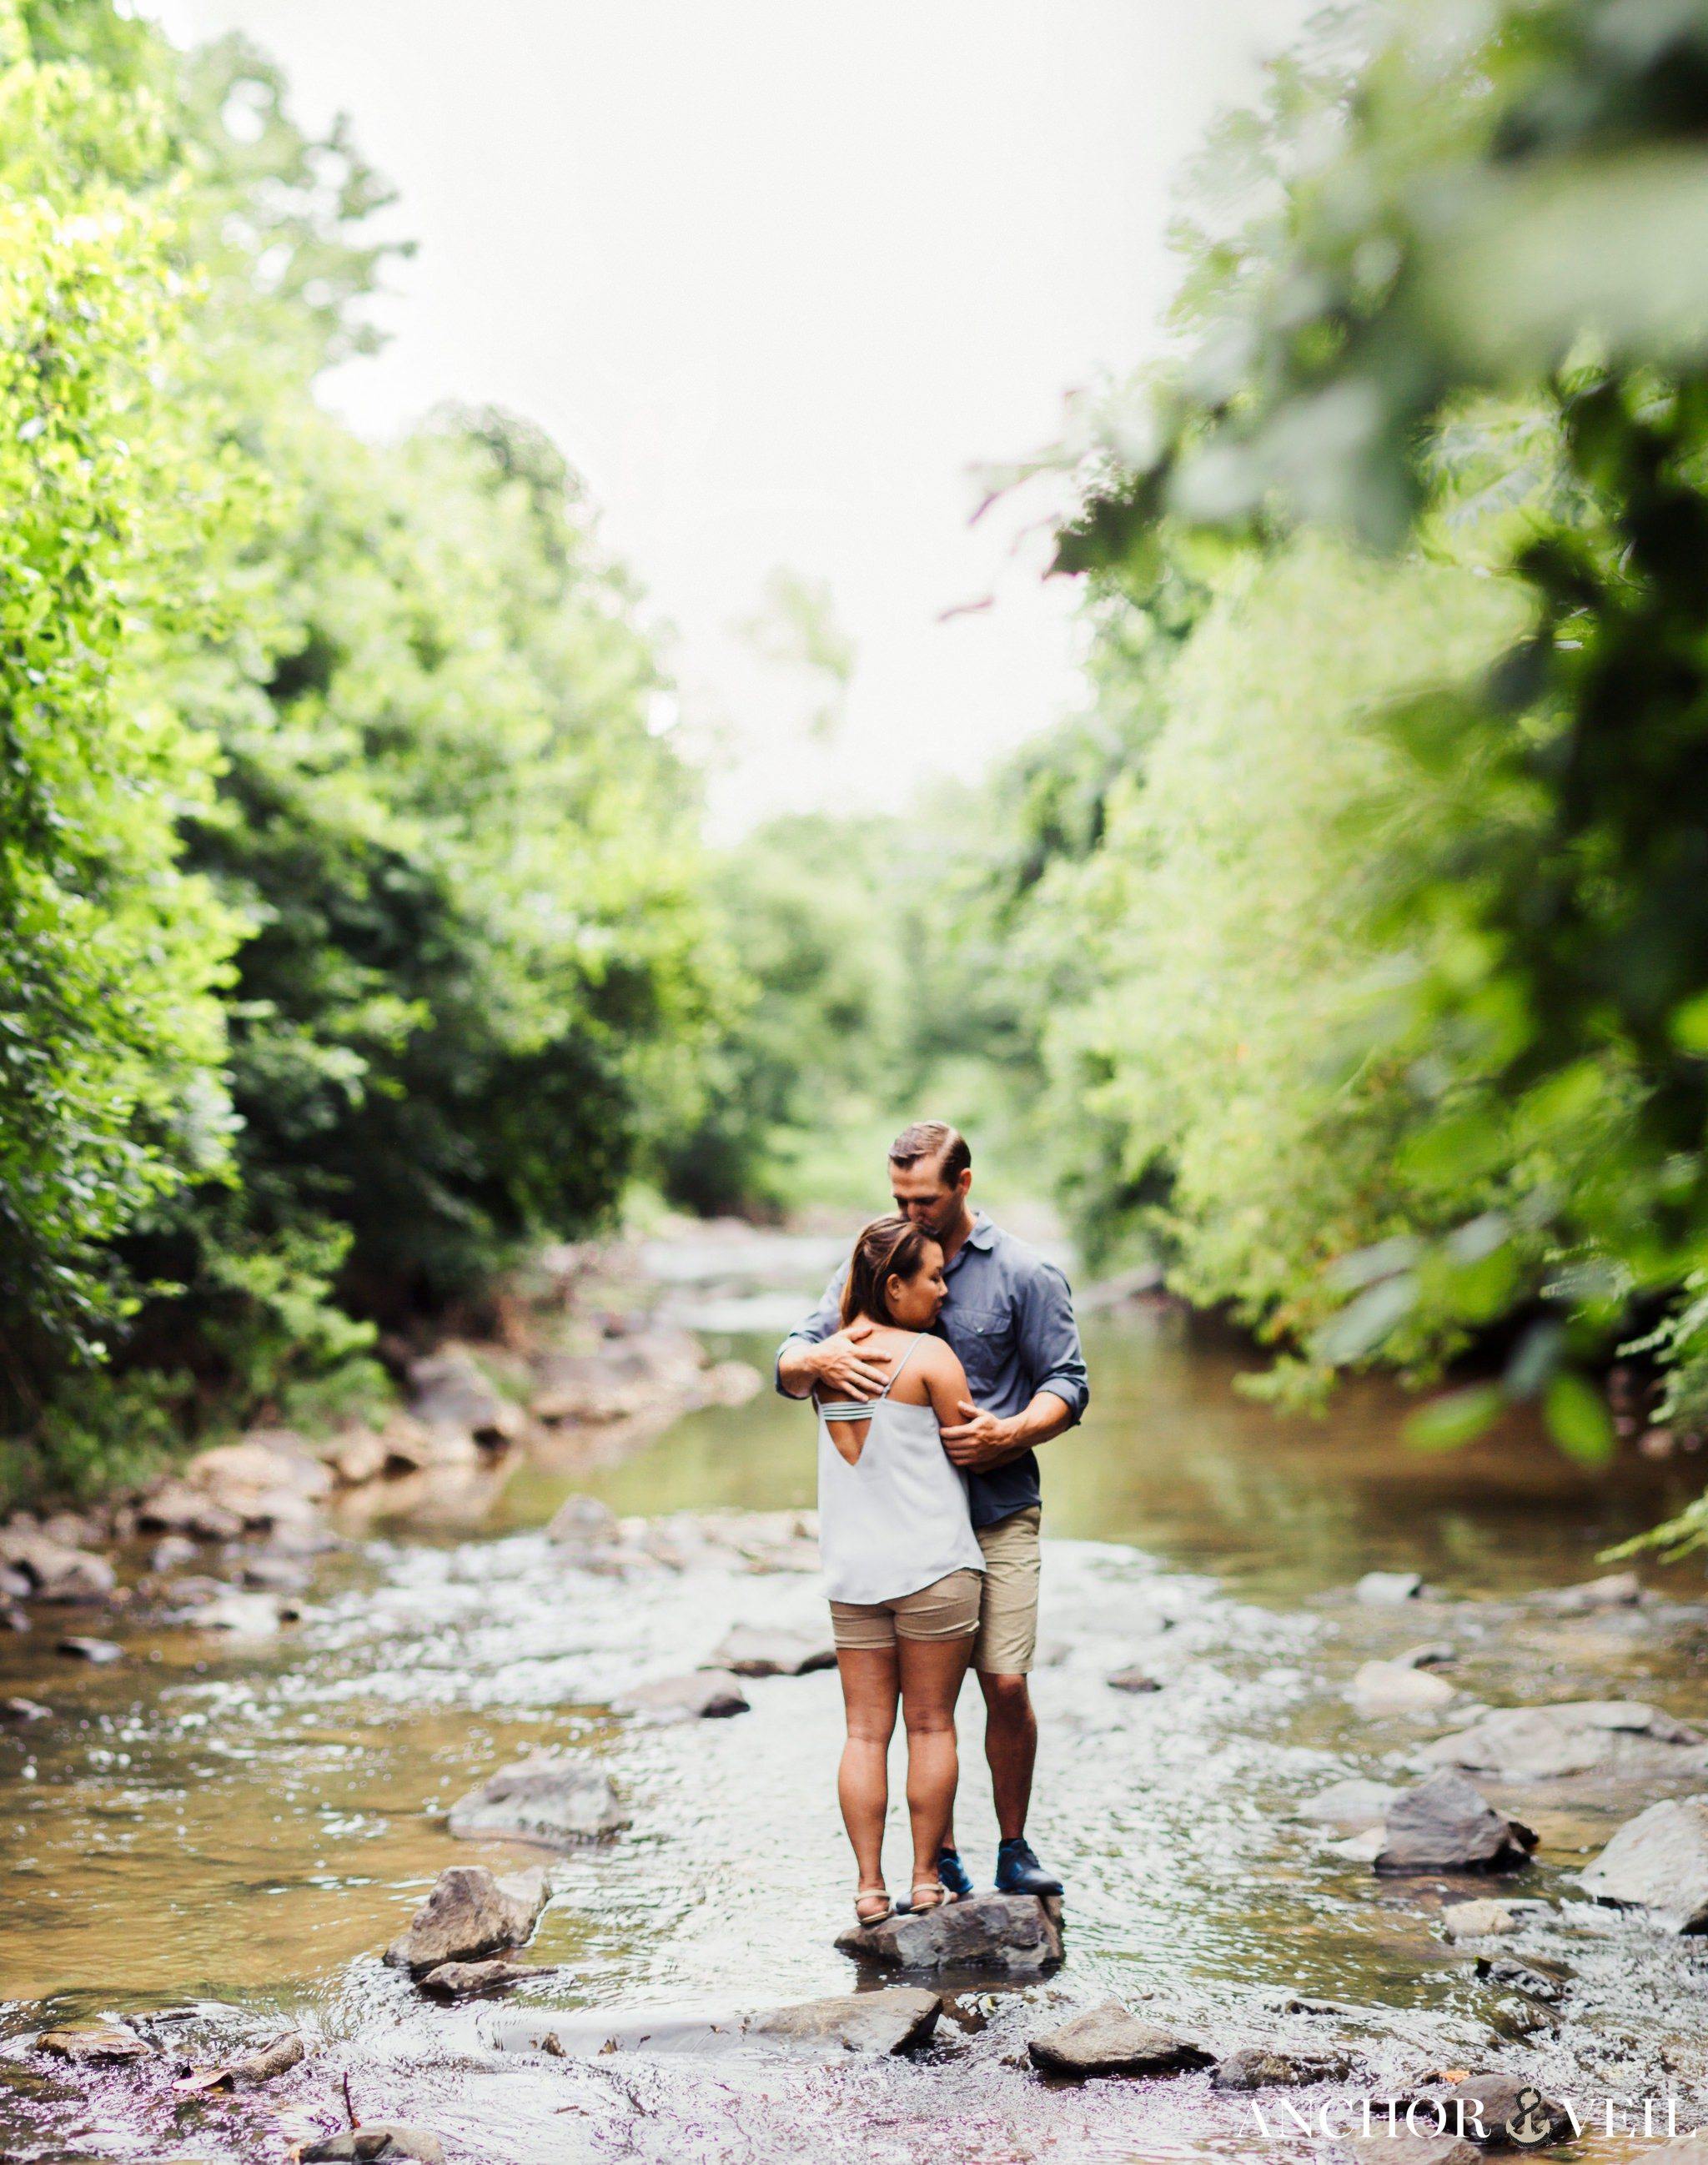 Brenizer method on the rocks in the middle of the river during their Freedom Park Engagement Session